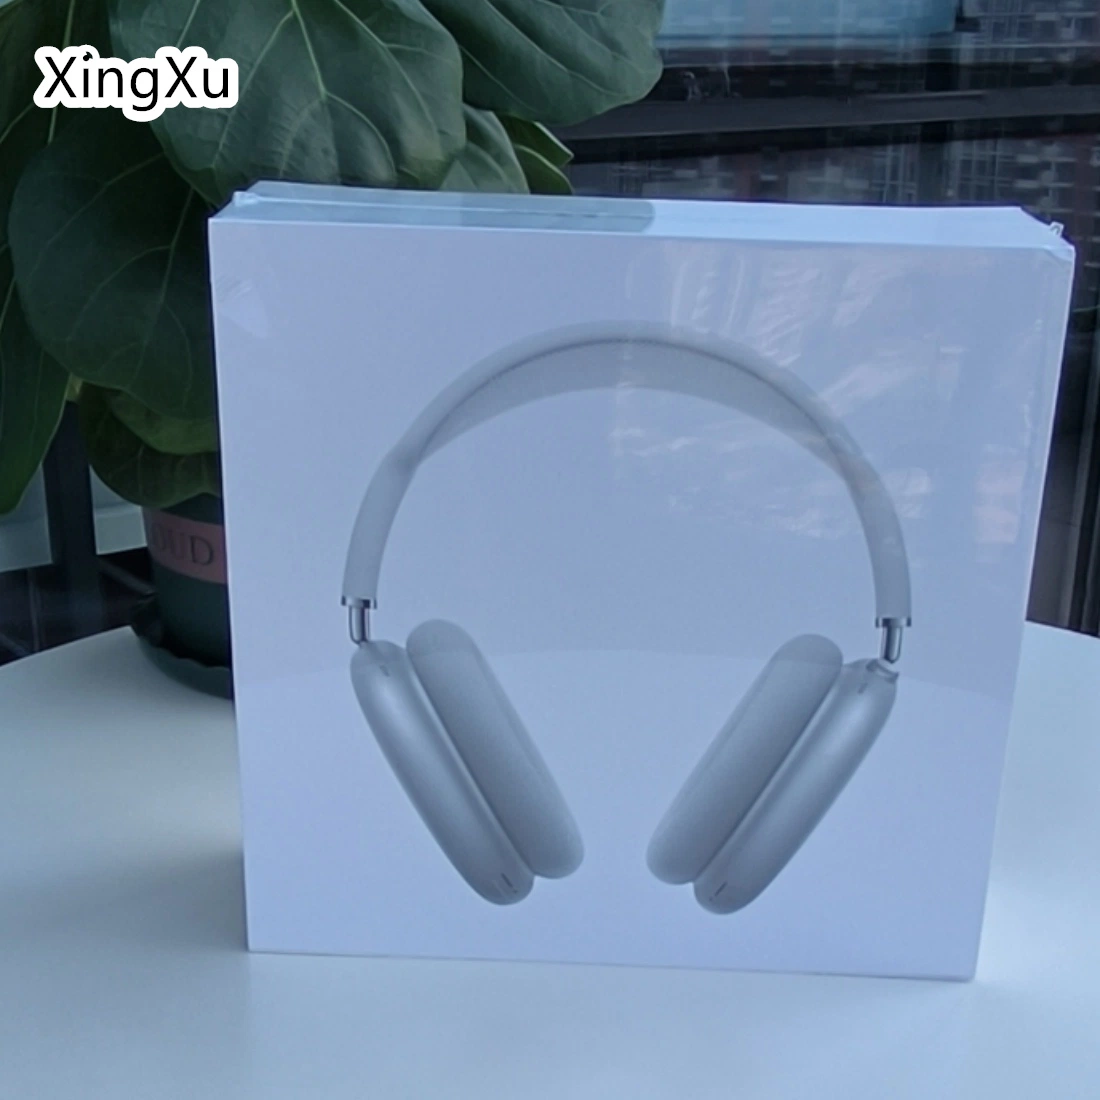 Original Air PRO P9 Max Wireless Headphone Sport Gaming Headset Noise Canceling Microphone Over-Ear for Apple Brand New